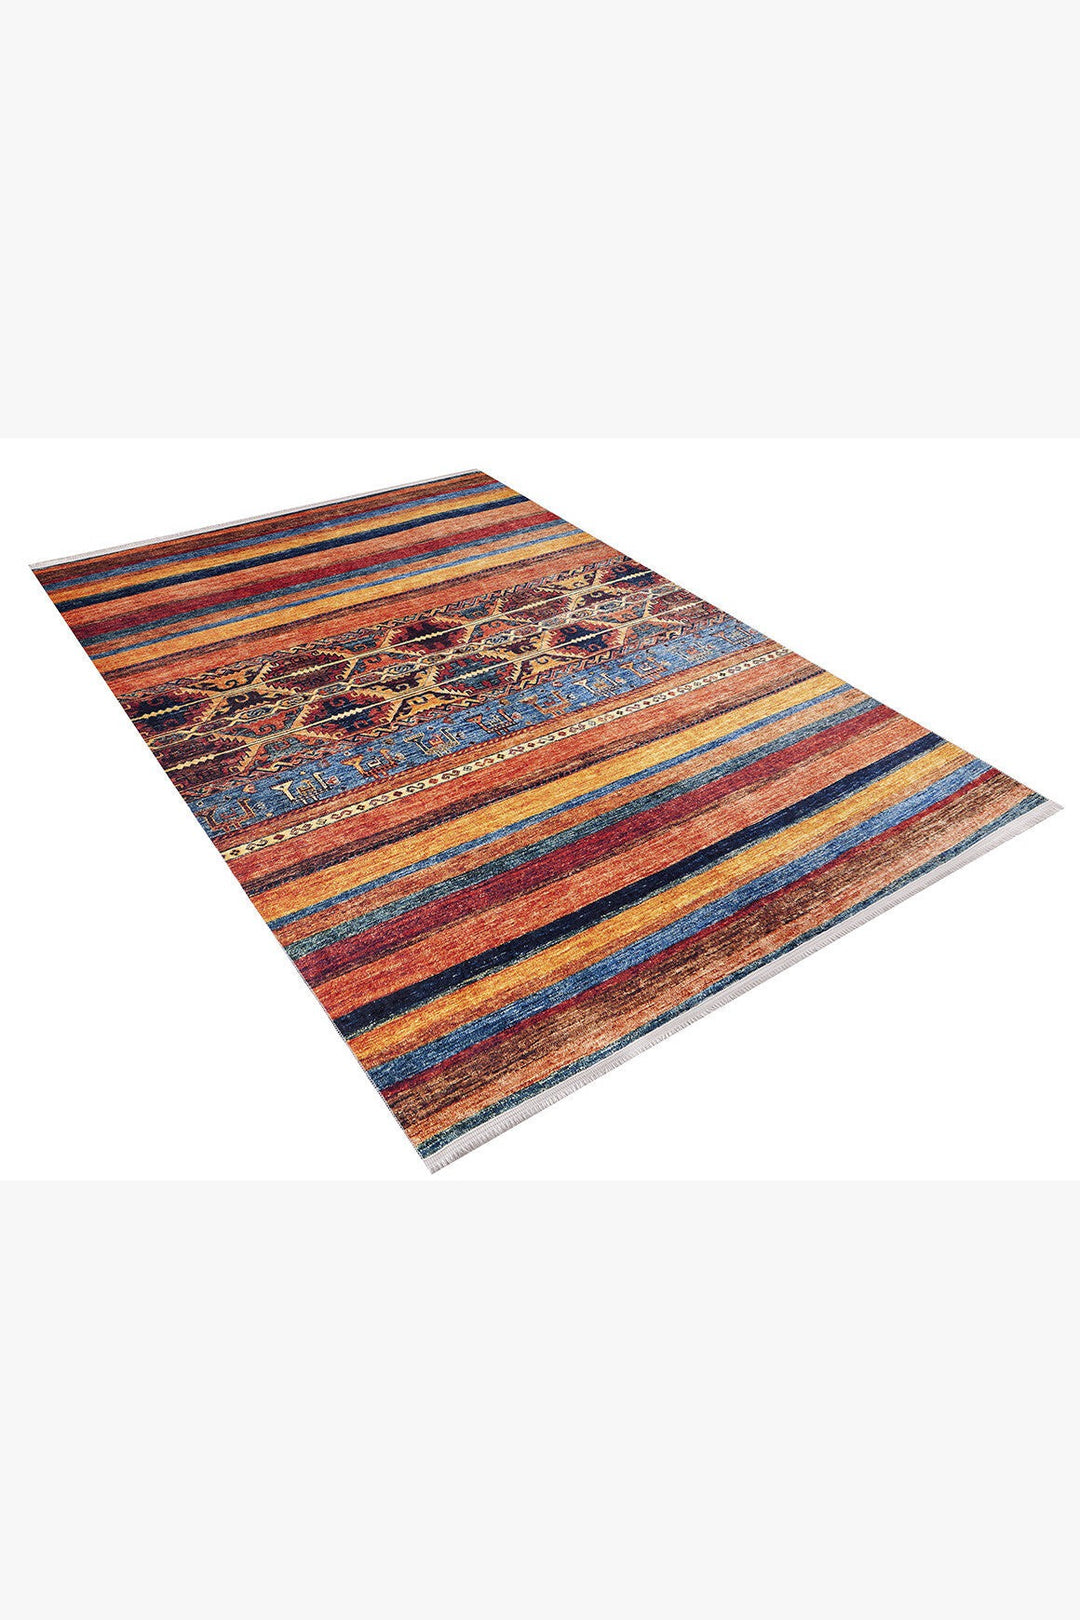 machine-washable-area-rug-Tribal-Ethnic-Stripe-Modern-Collection-Multicolor-Red-JR860